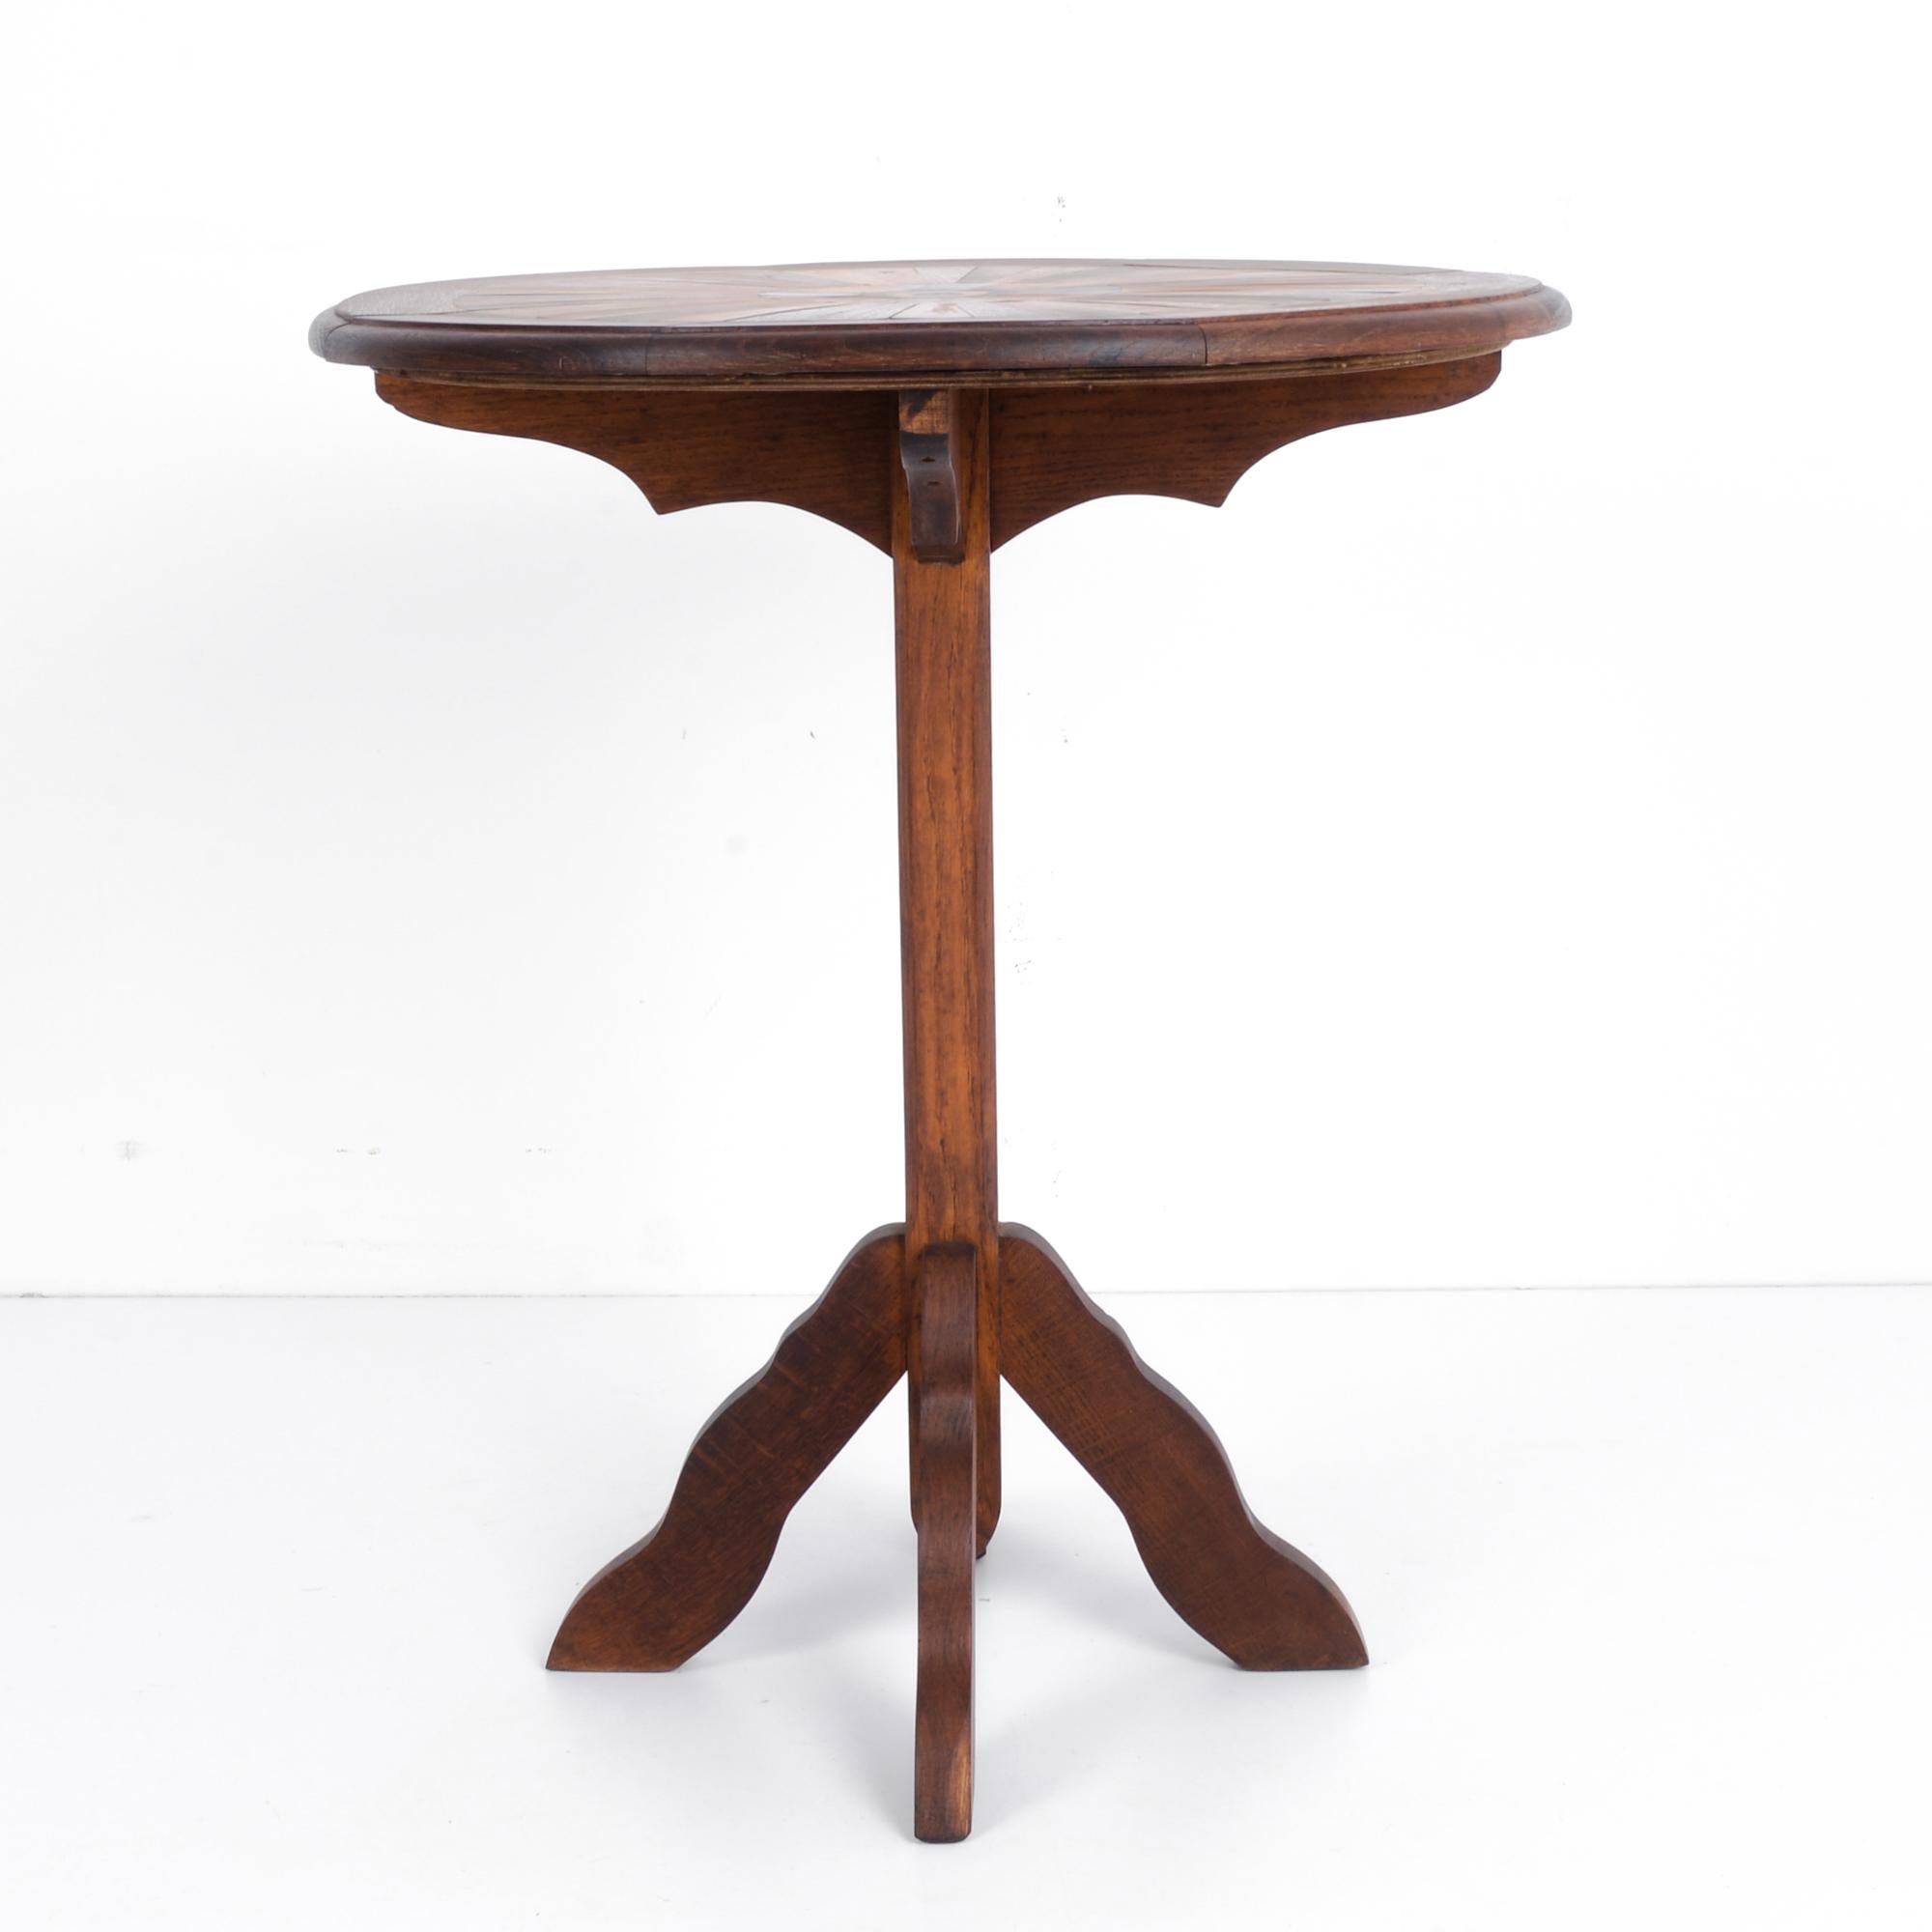 This wooden side table was made in France, circa 1900. A four-legged base around a post supports the table. The round tabletop features a radial arrangement of wooden bars, each displaying an elegant, polished finish. This multi-toned effect from